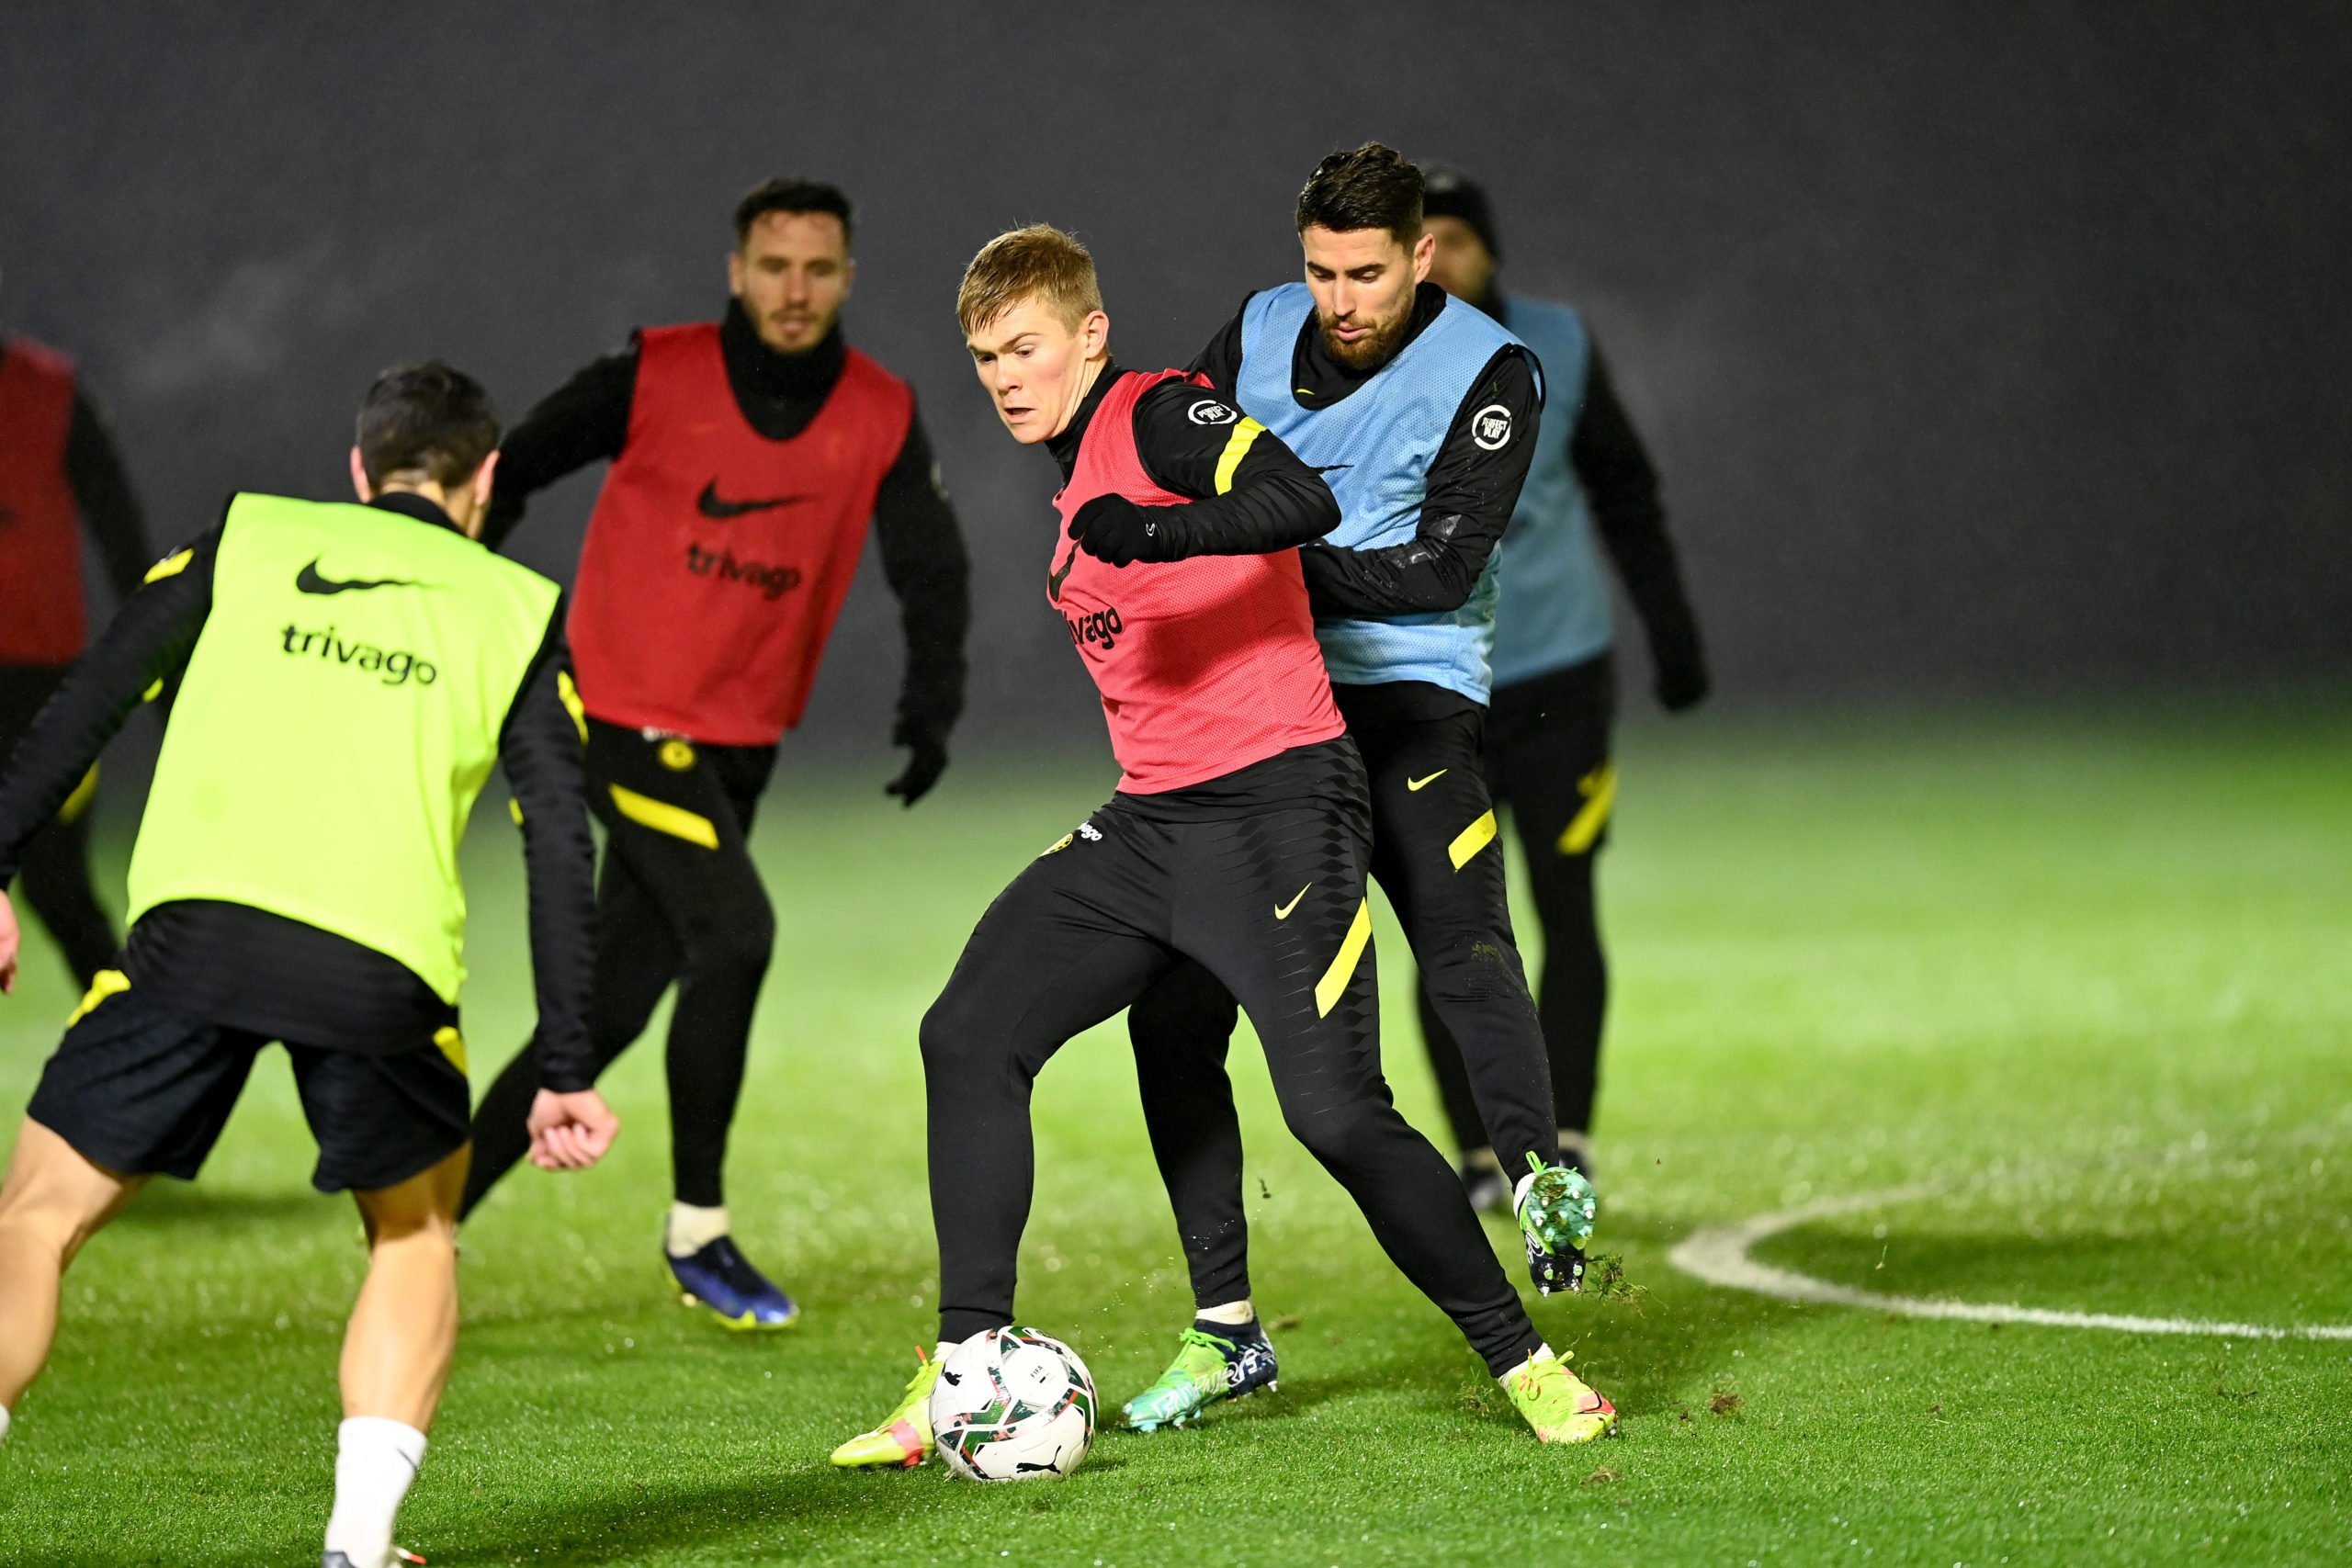 Photo: 17-year-old Chelsea prospect still in Tuchel's first-team training after impressing in recent weeks